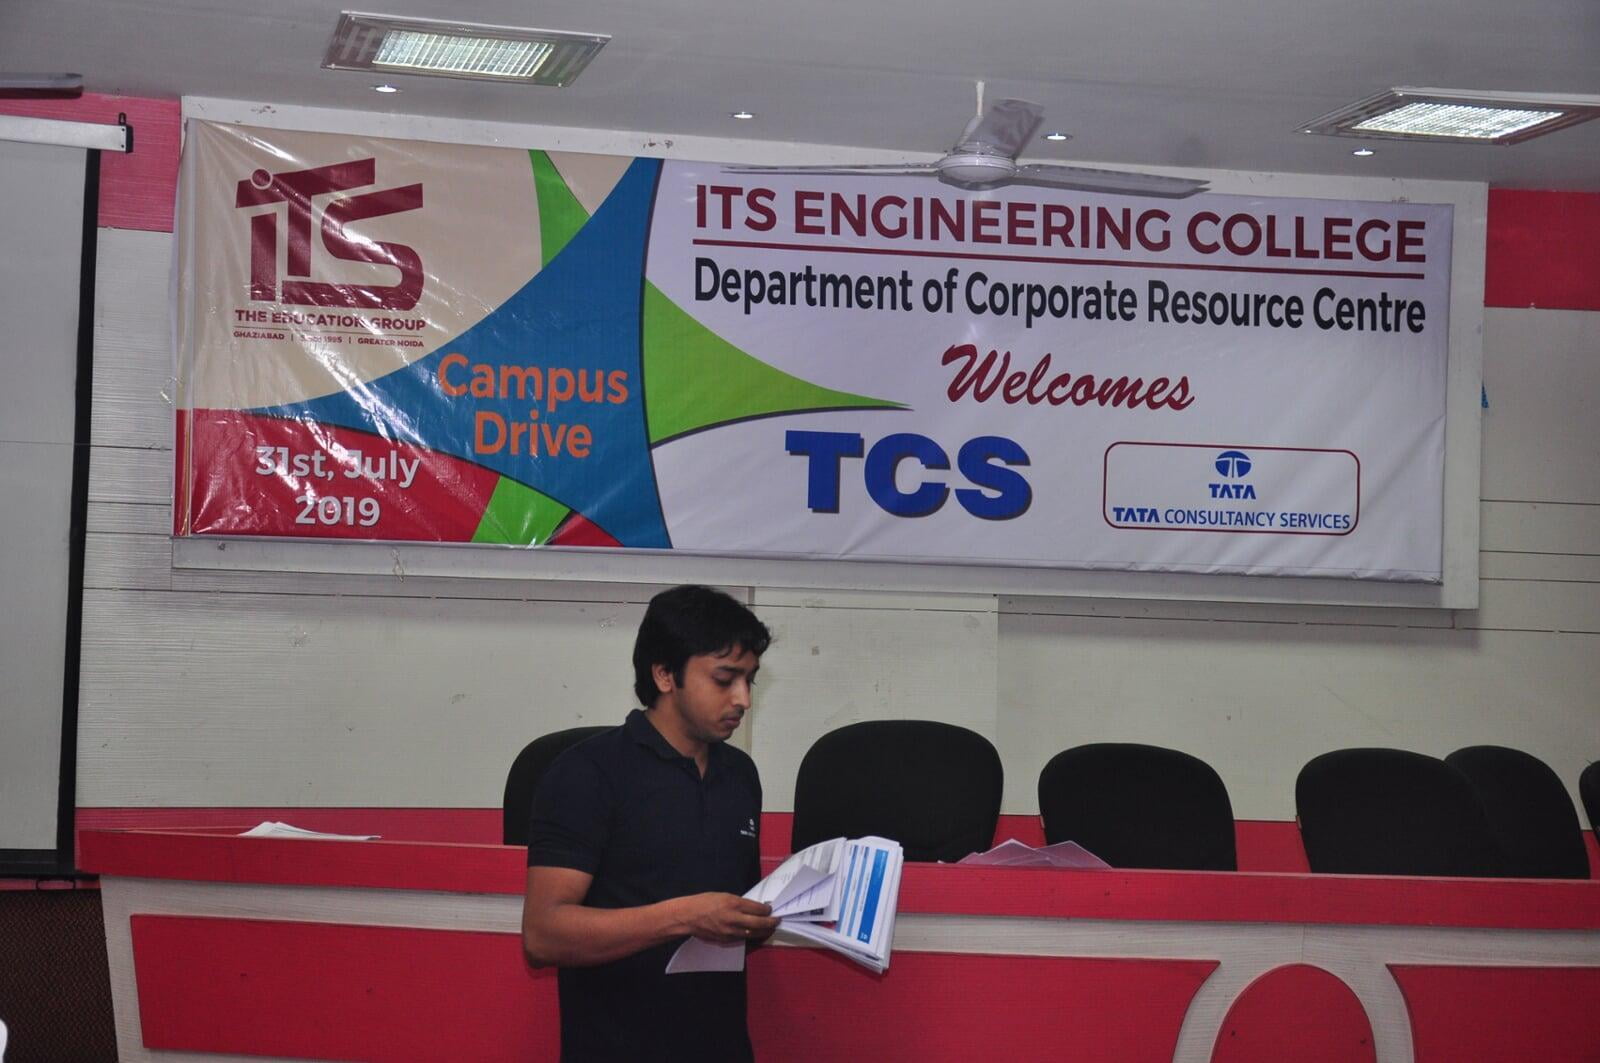 TCS ITS Engineering College